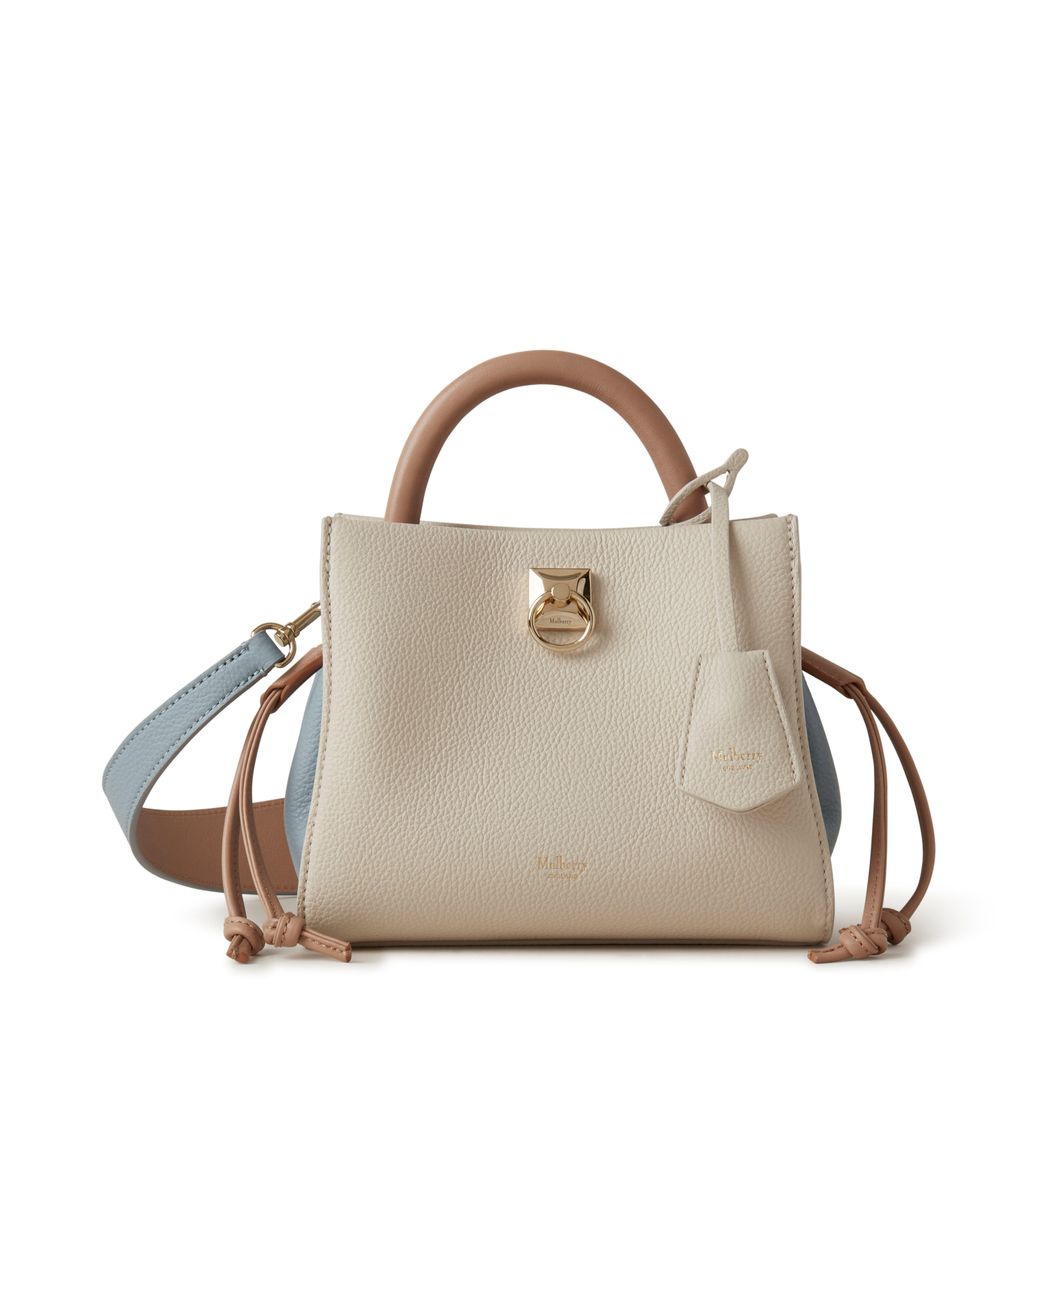 Mulberry Mini Iris In Cloud, Chalk And Light Salmon Small Classic